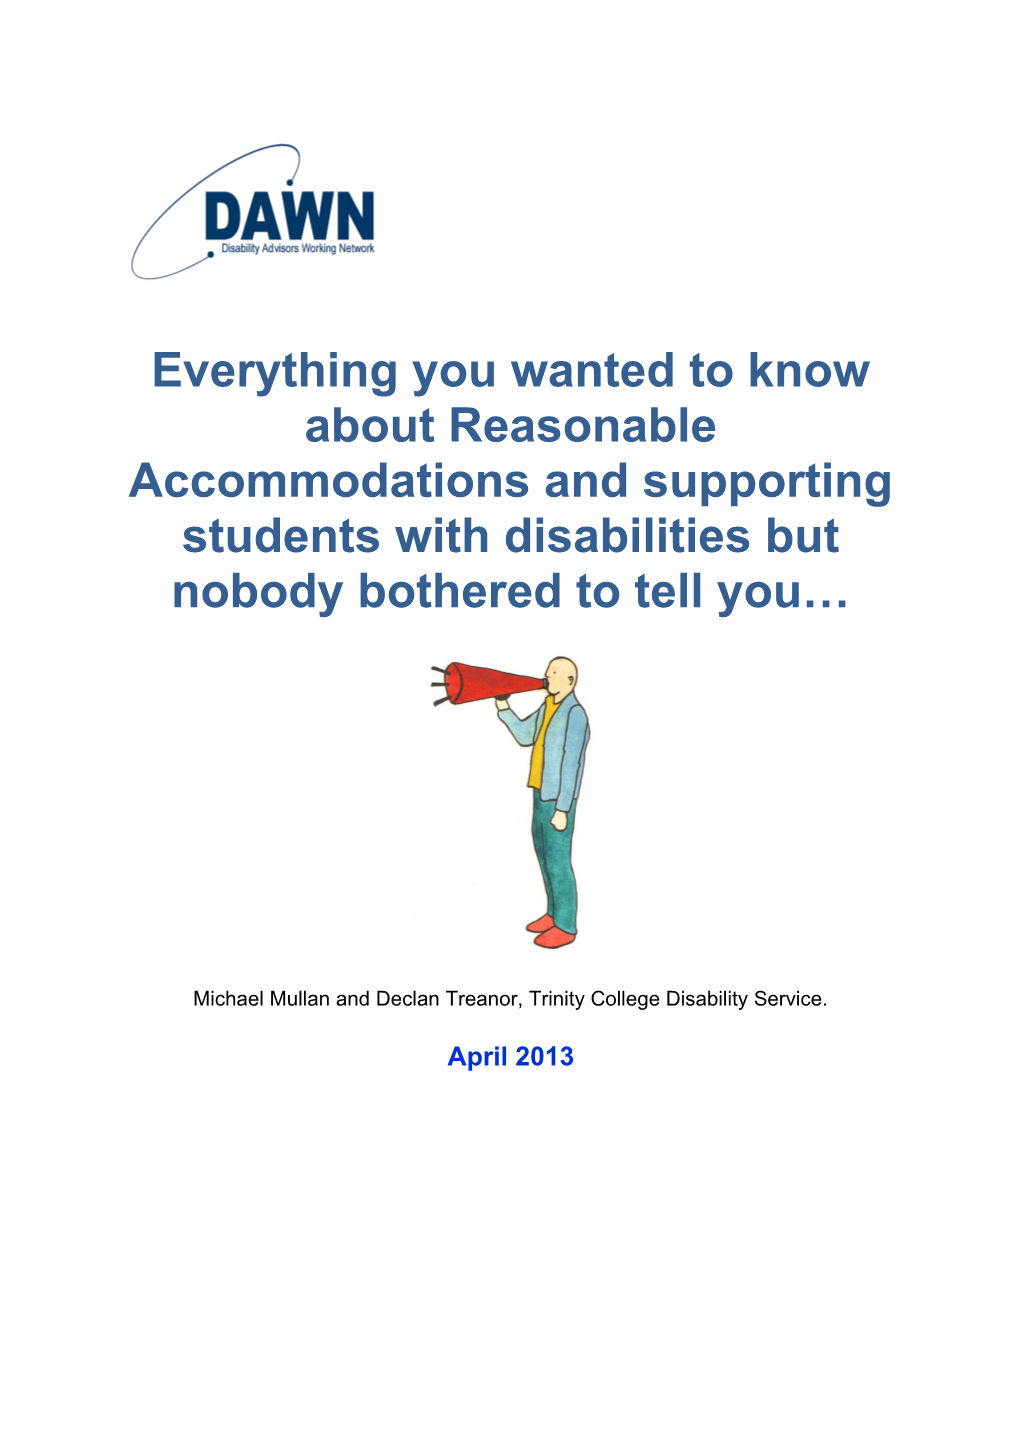 Everything You Wanted to Know About Reasonable Accommodations and Supporting Students